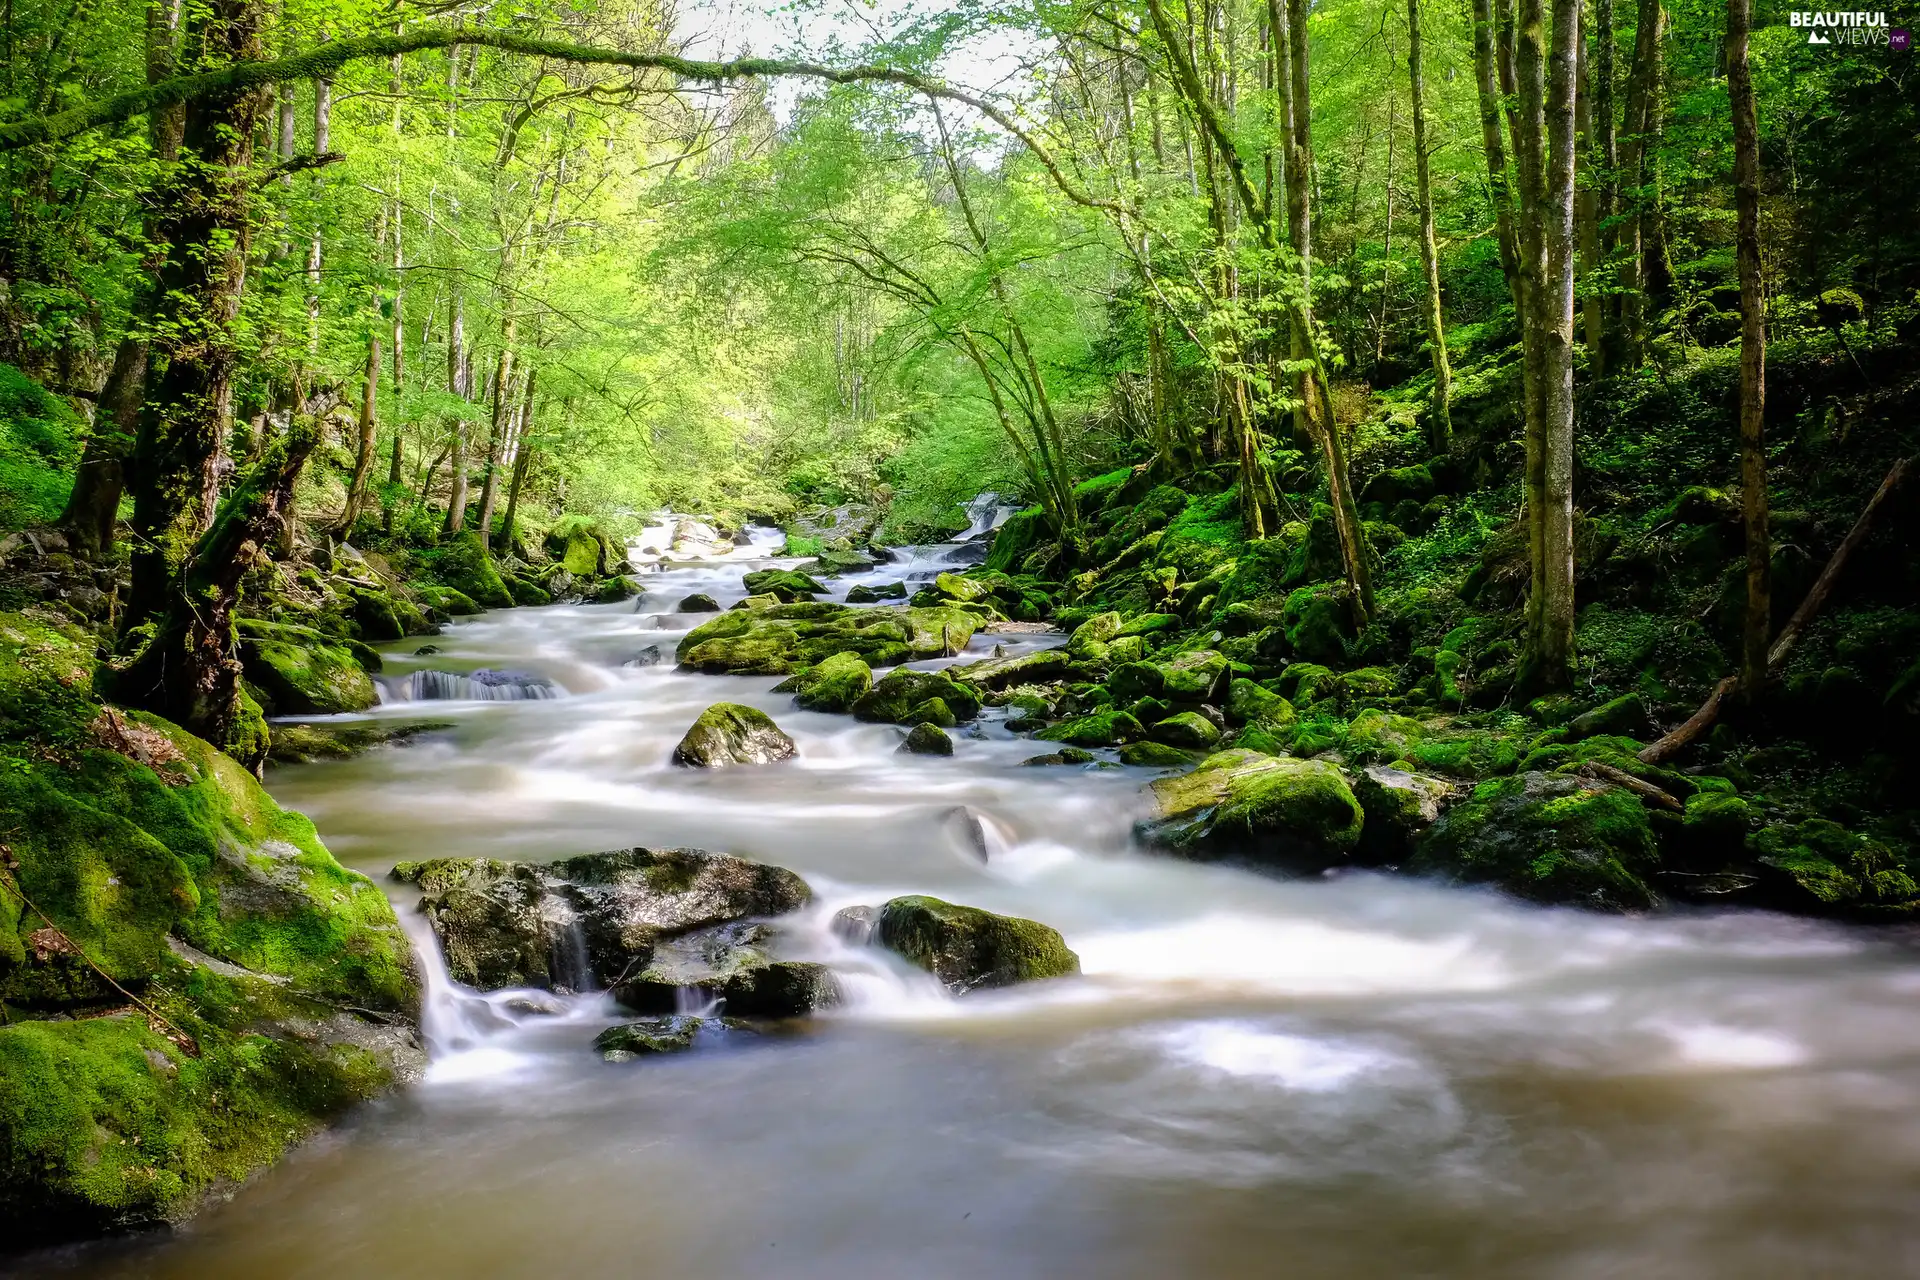 Stones, River, viewes, mossy, forest, trees, green